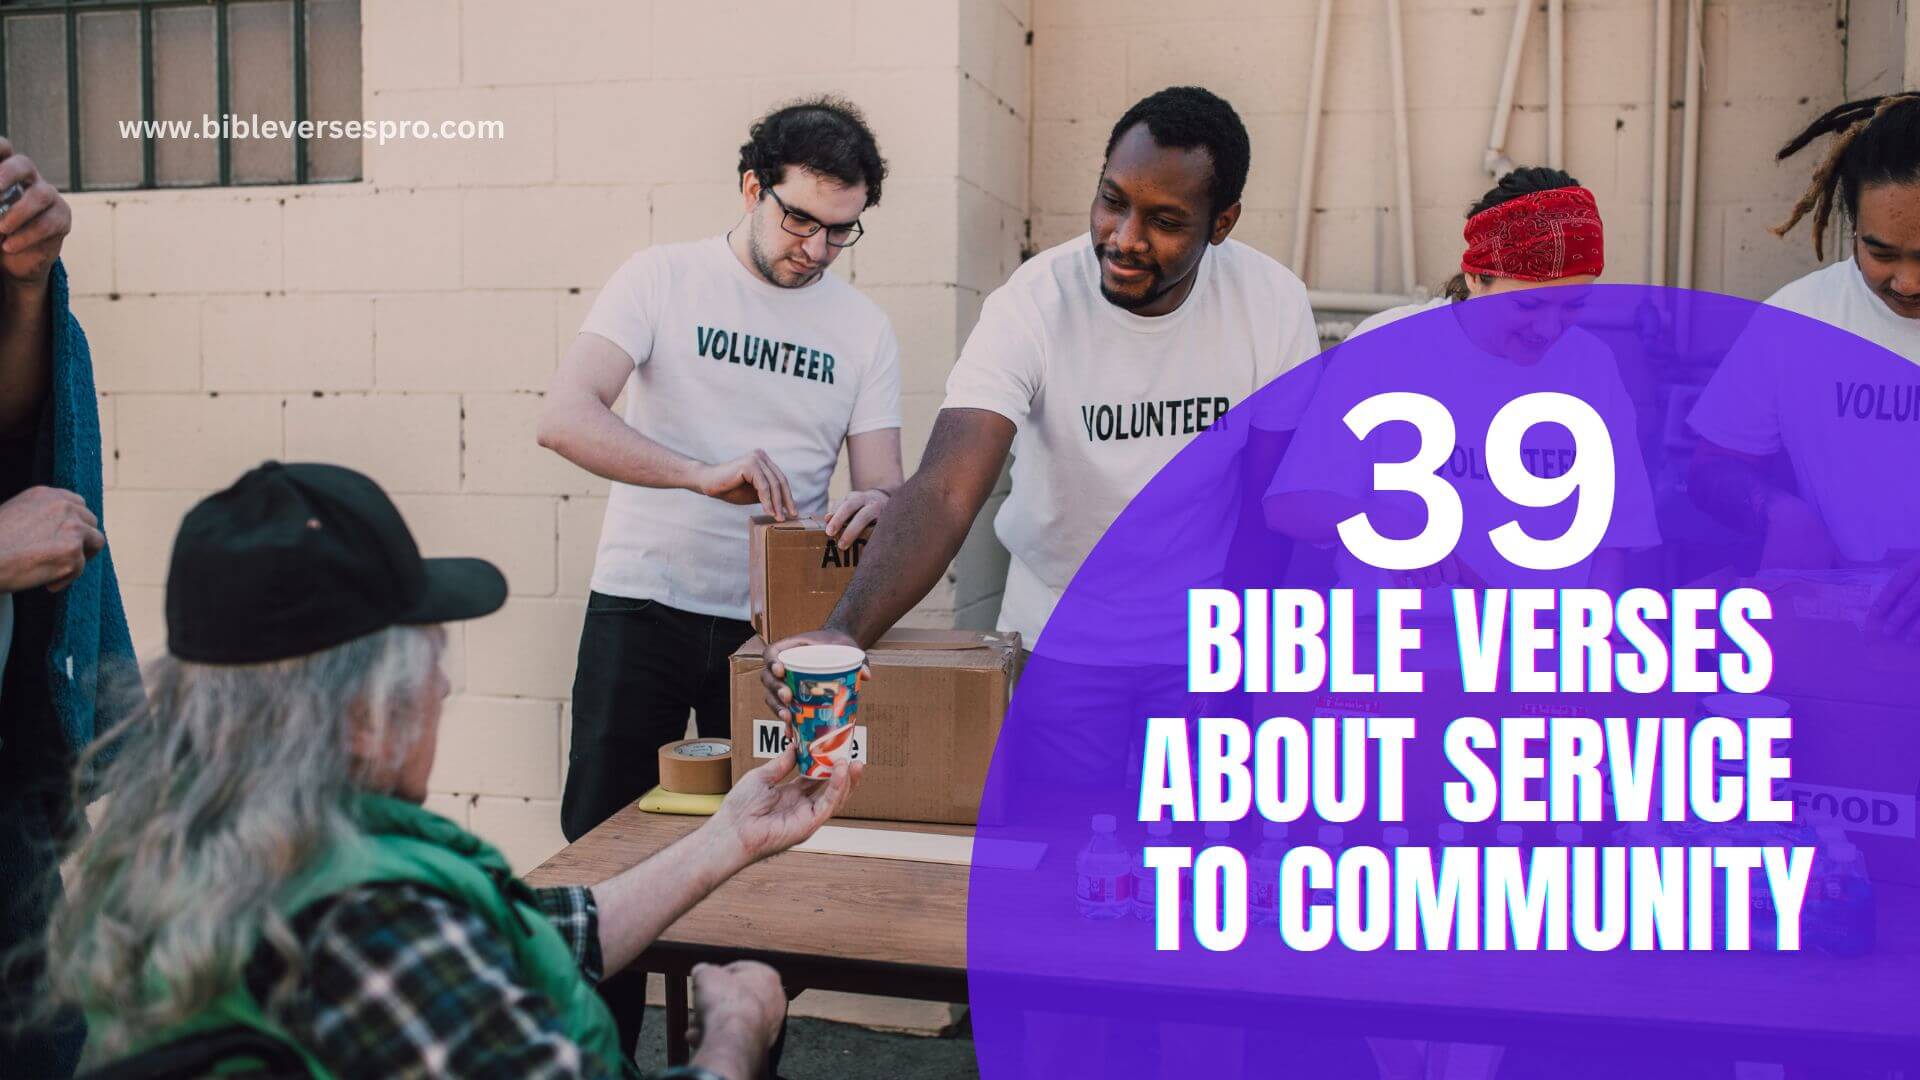 BIBLE VERSES ABOUT SERVICE TO COMMUNITY